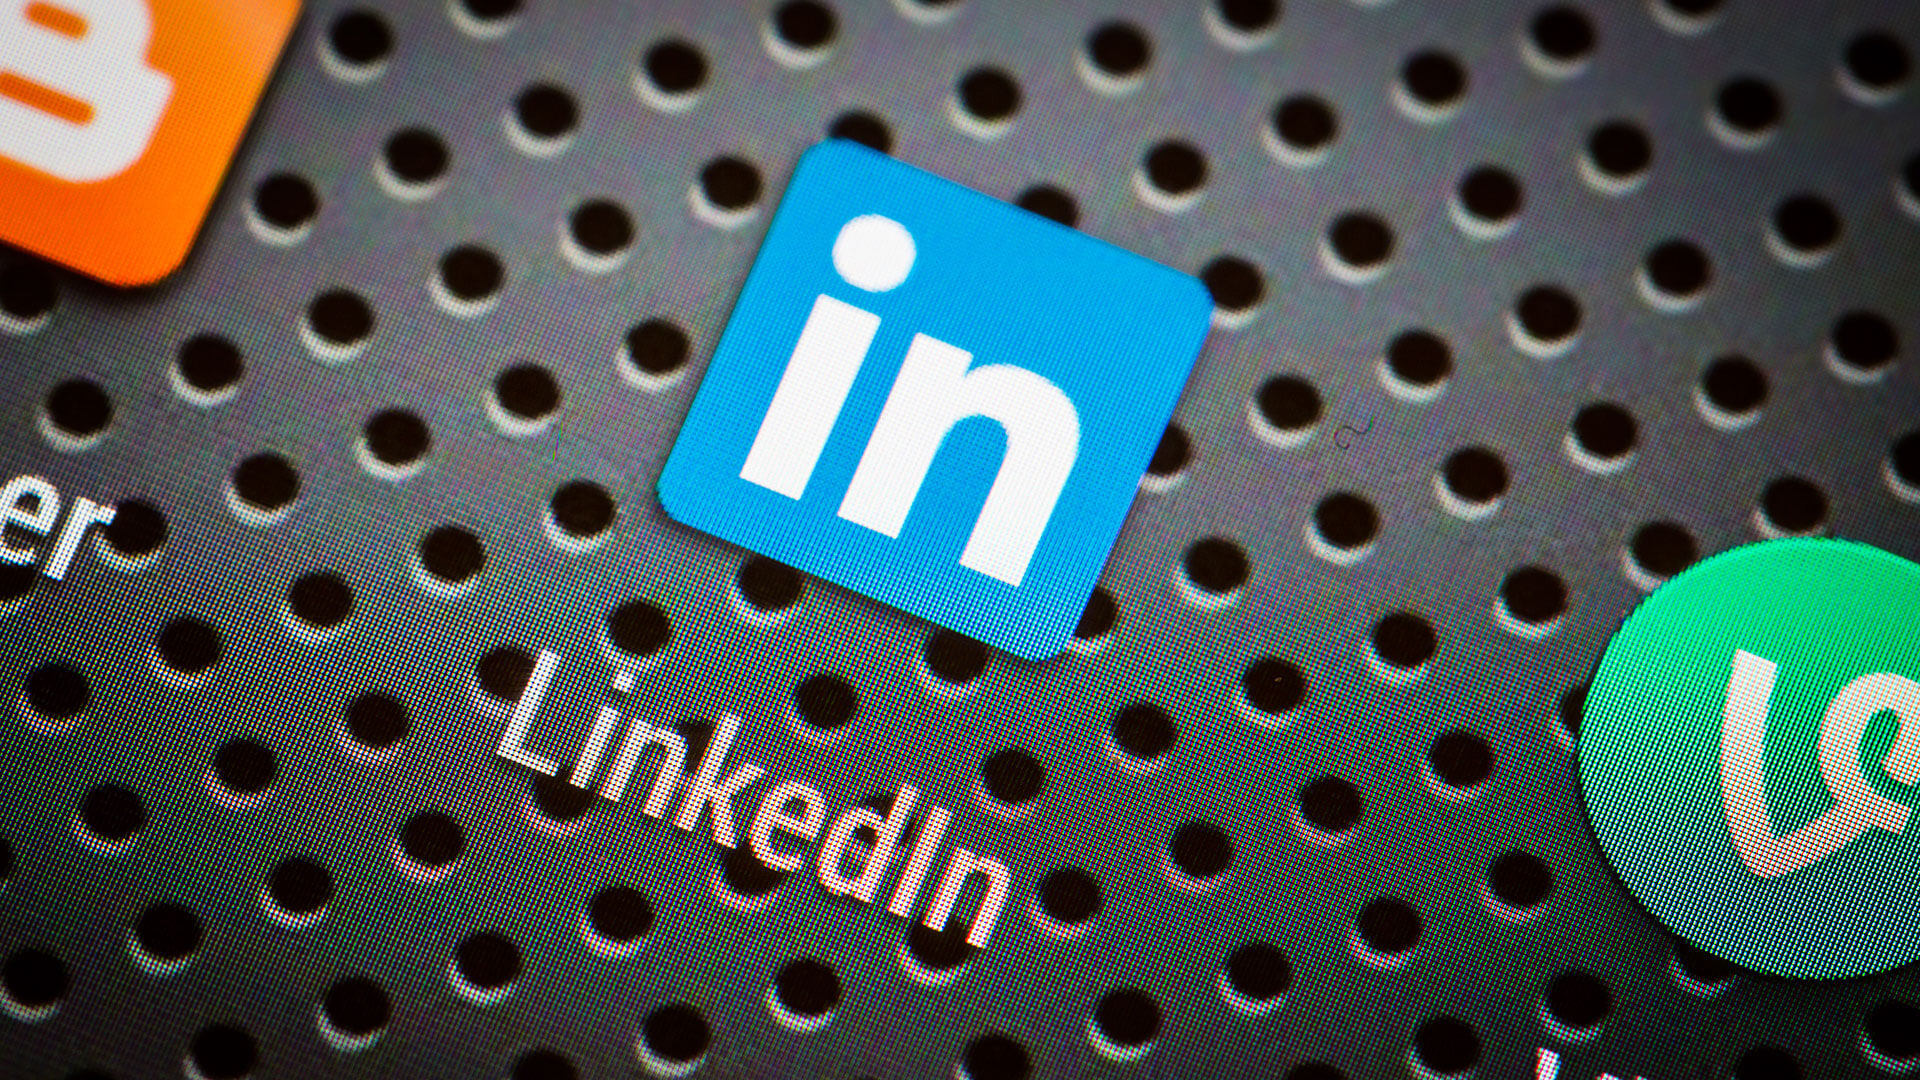 LinkedIn introduces CTV ads for B2B campaigns